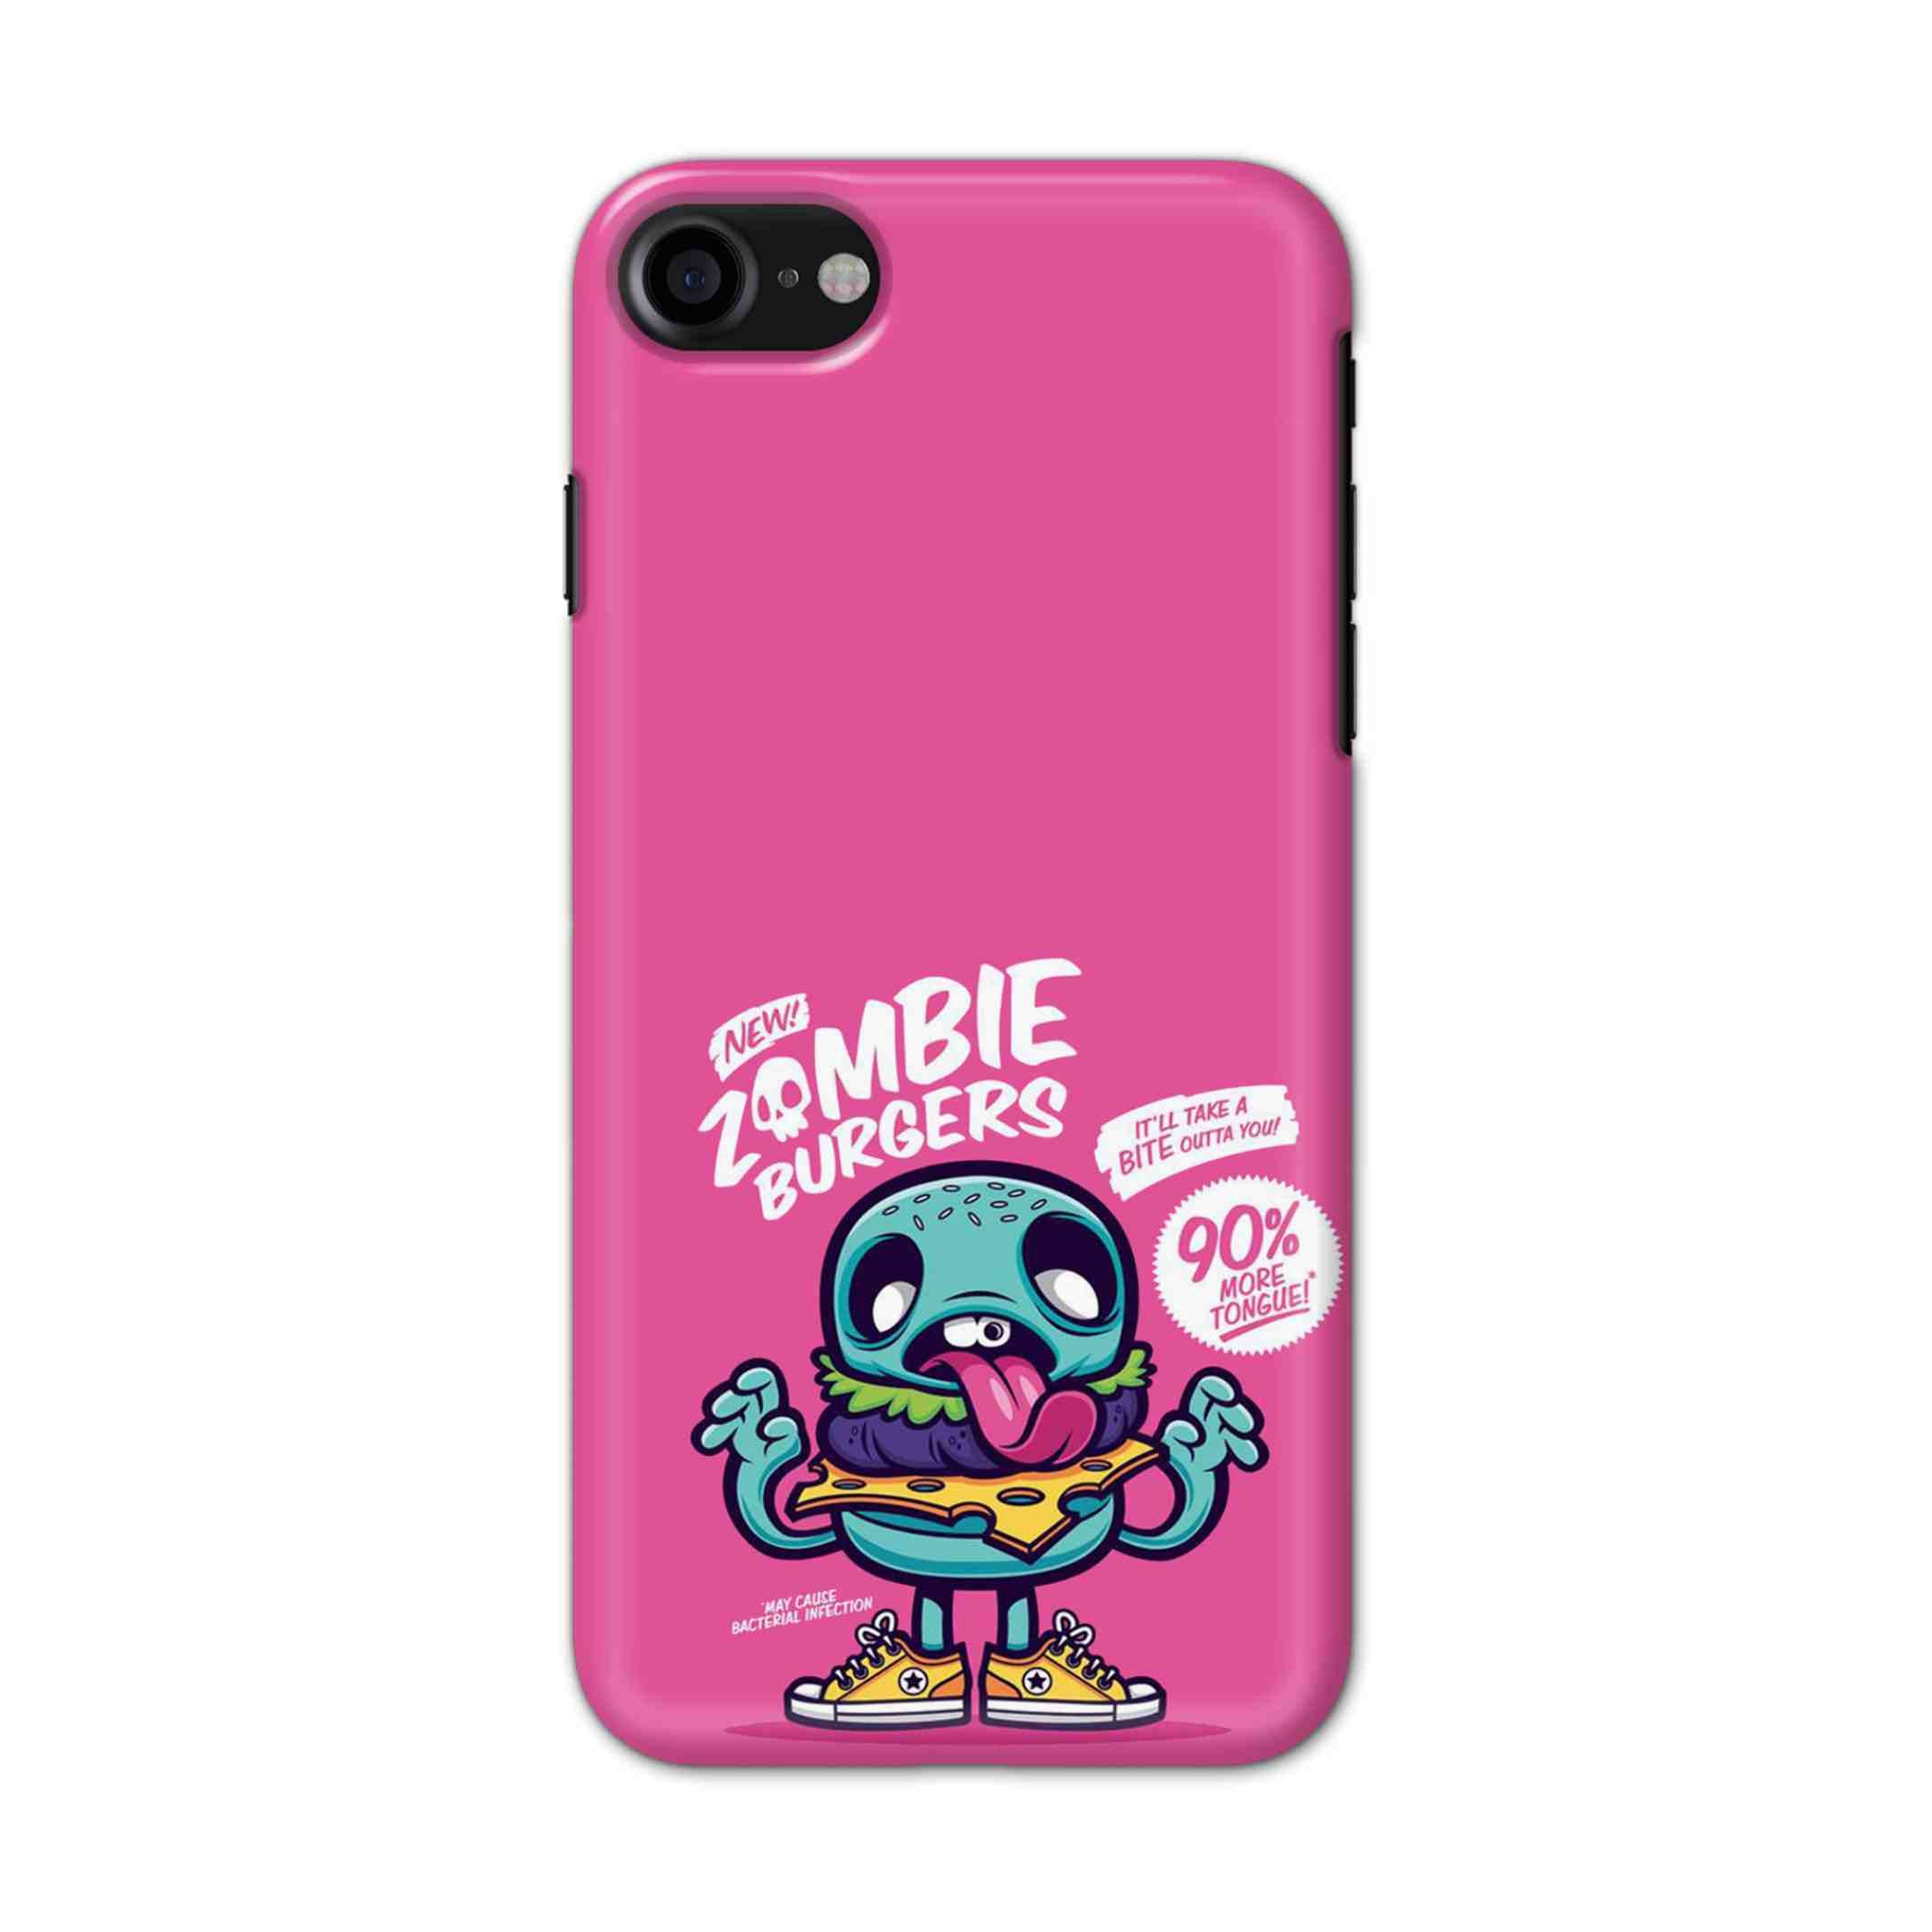 Buy New Zombie Burgers Hard Back Mobile Phone Case/Cover For iPhone 7 / 8 Online